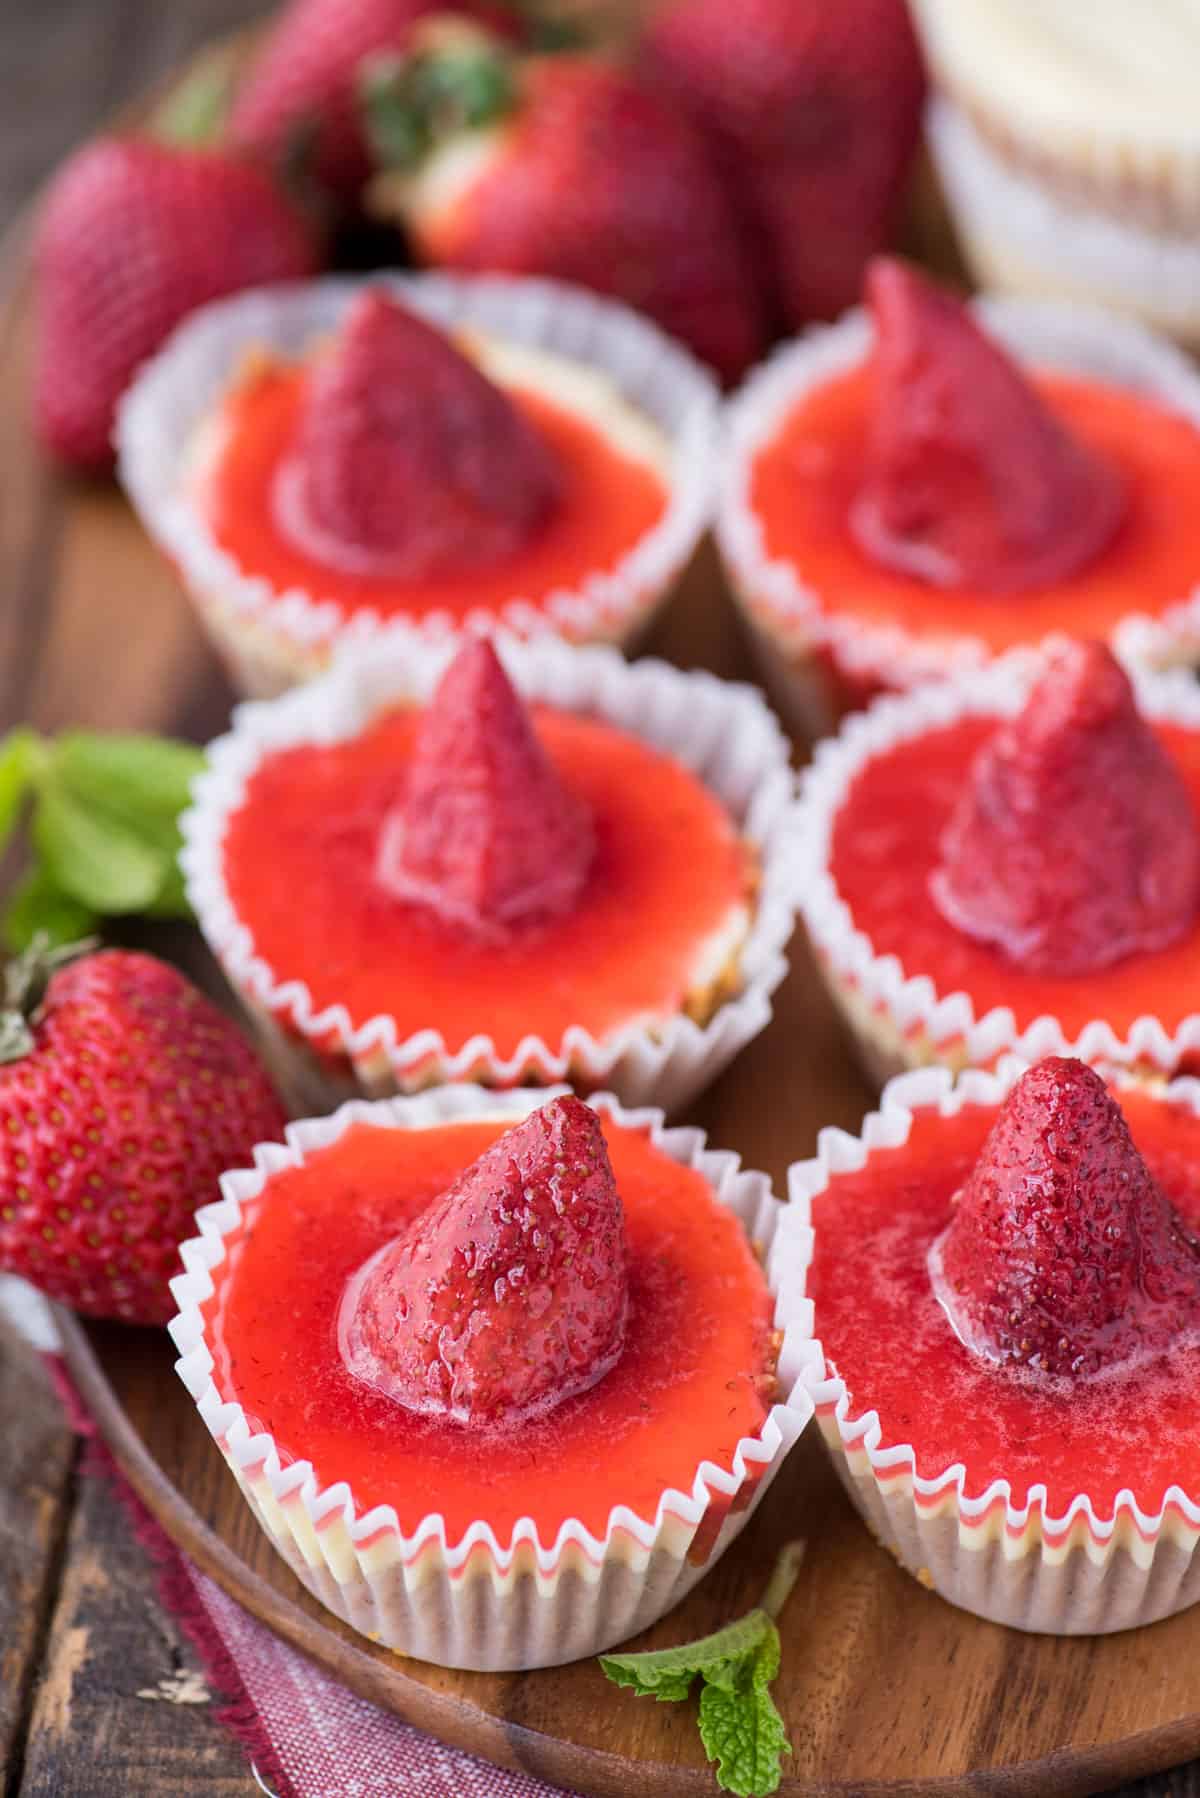 6 mini plain cheesecakes with strawberry topping on wood serving tray